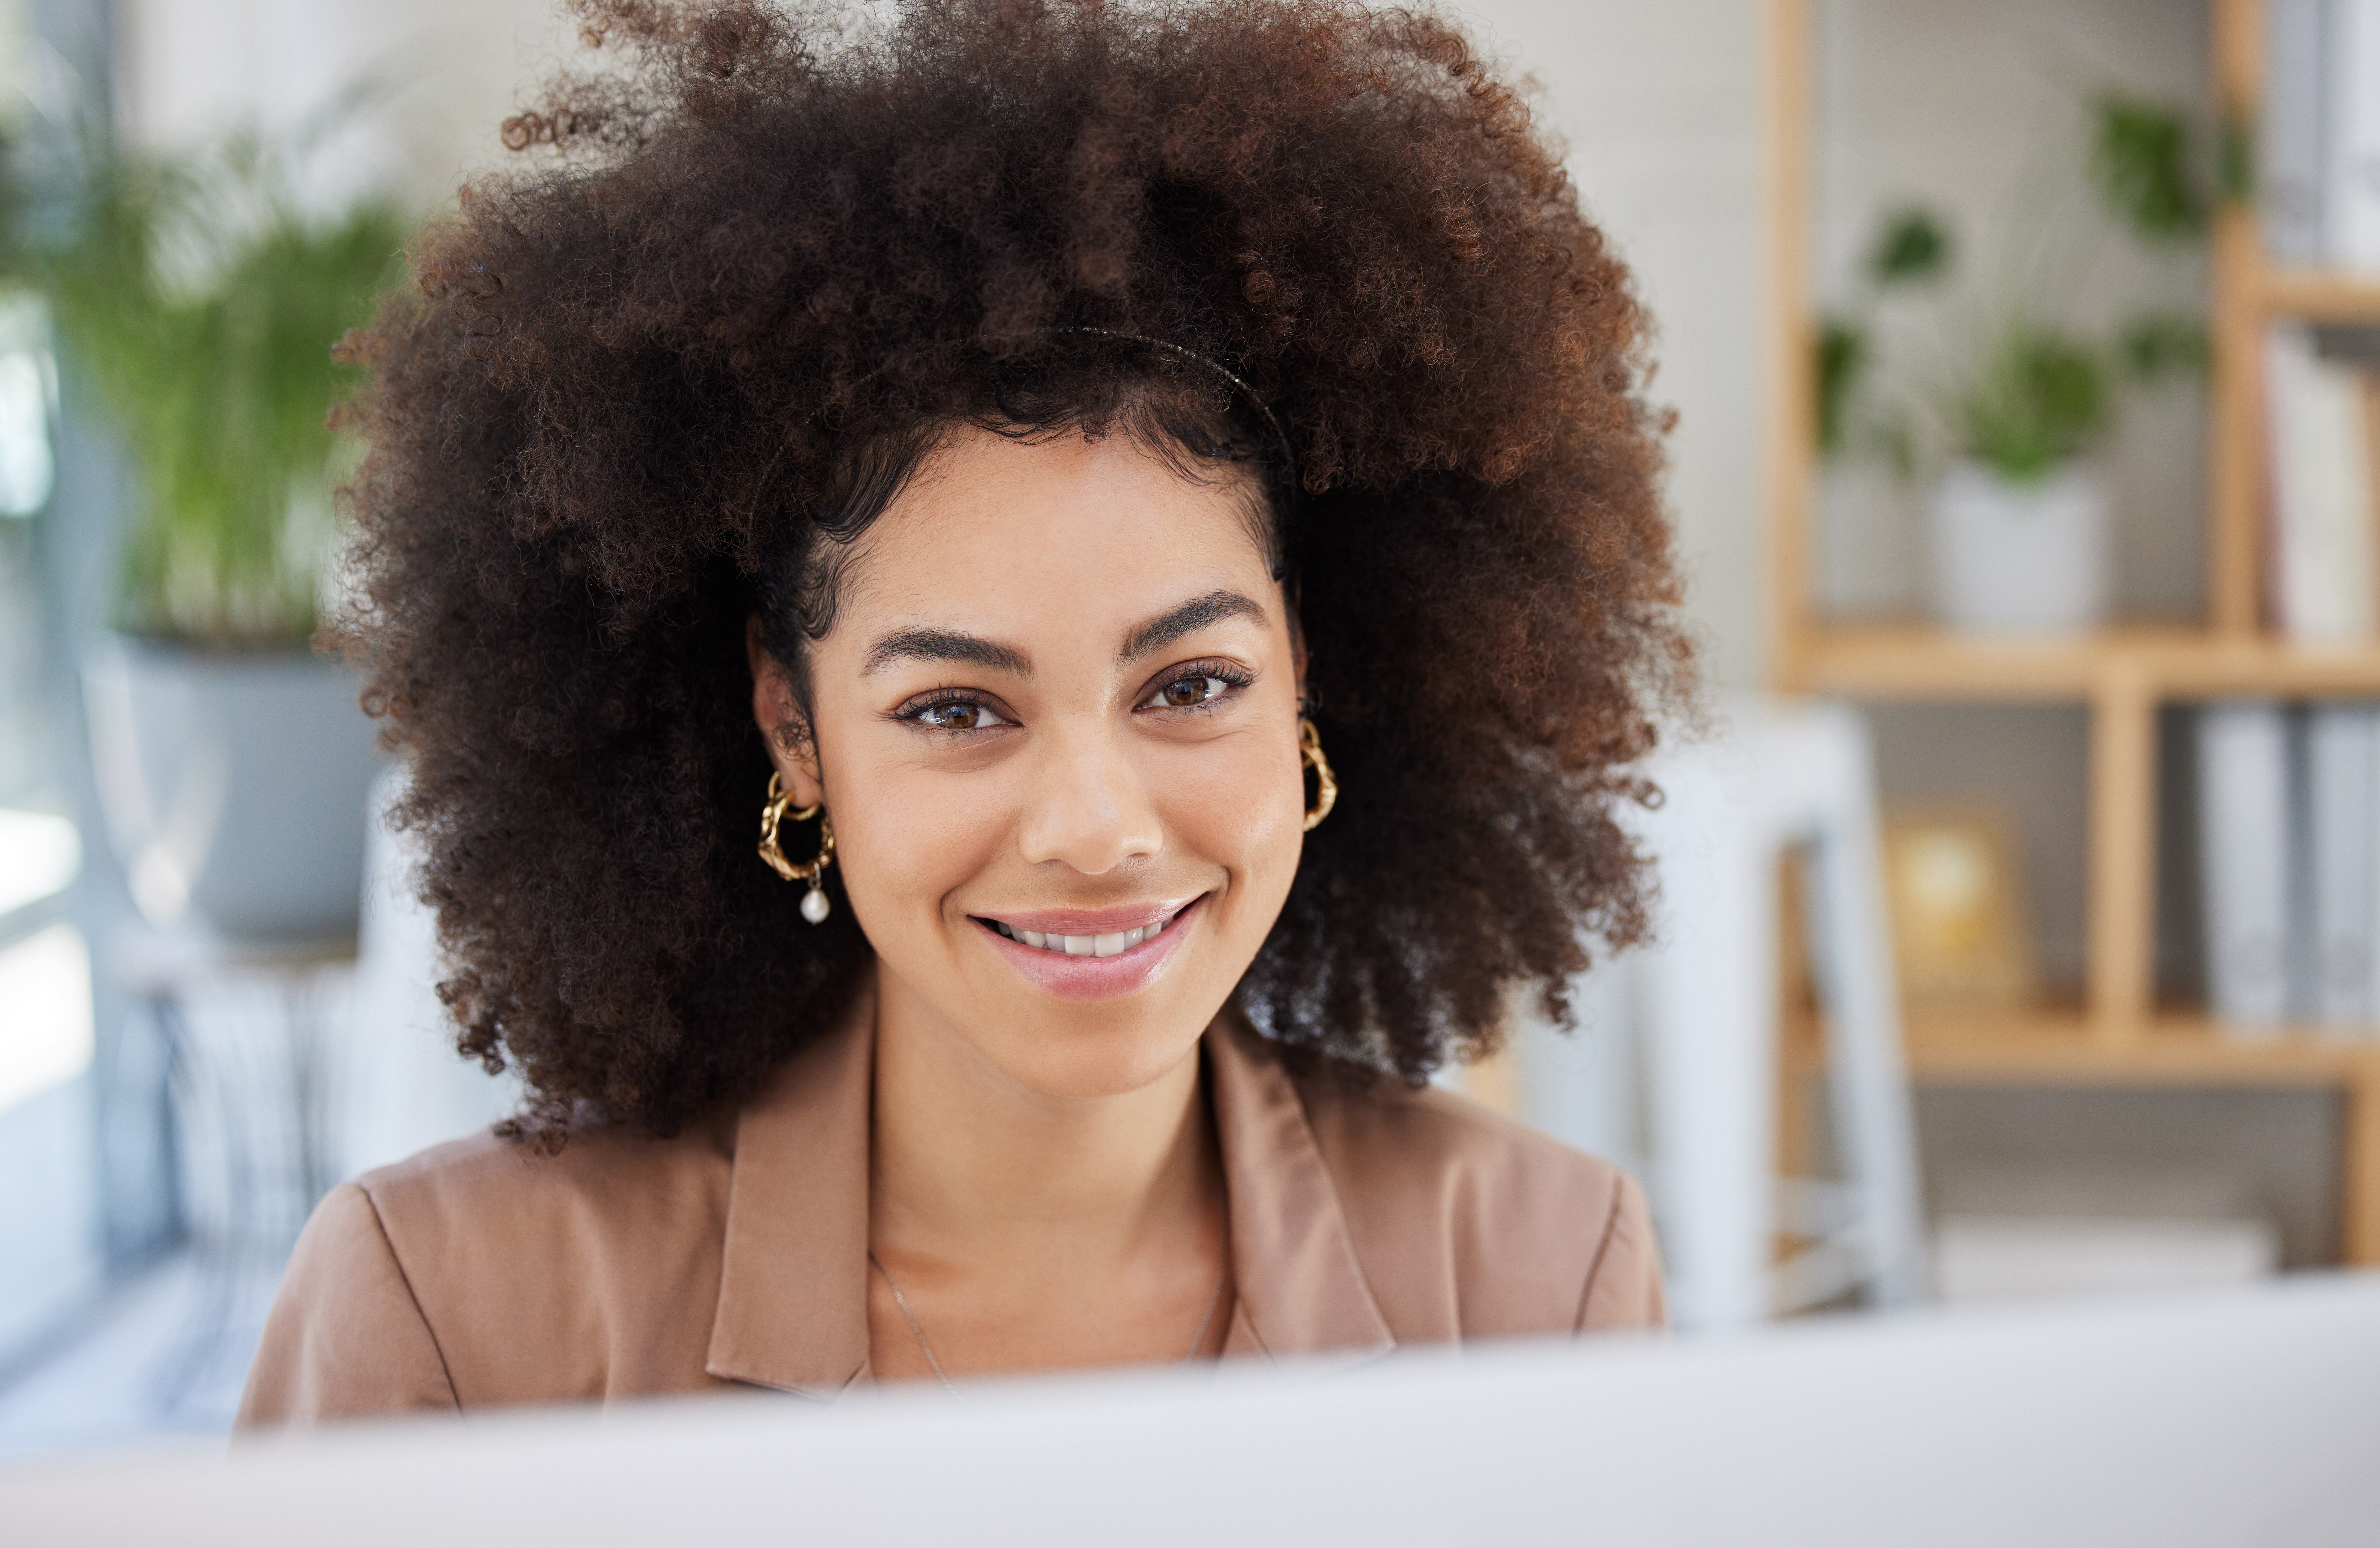 Closeup portrait of one young smiling African American woman using a desktop while sitting at a des.